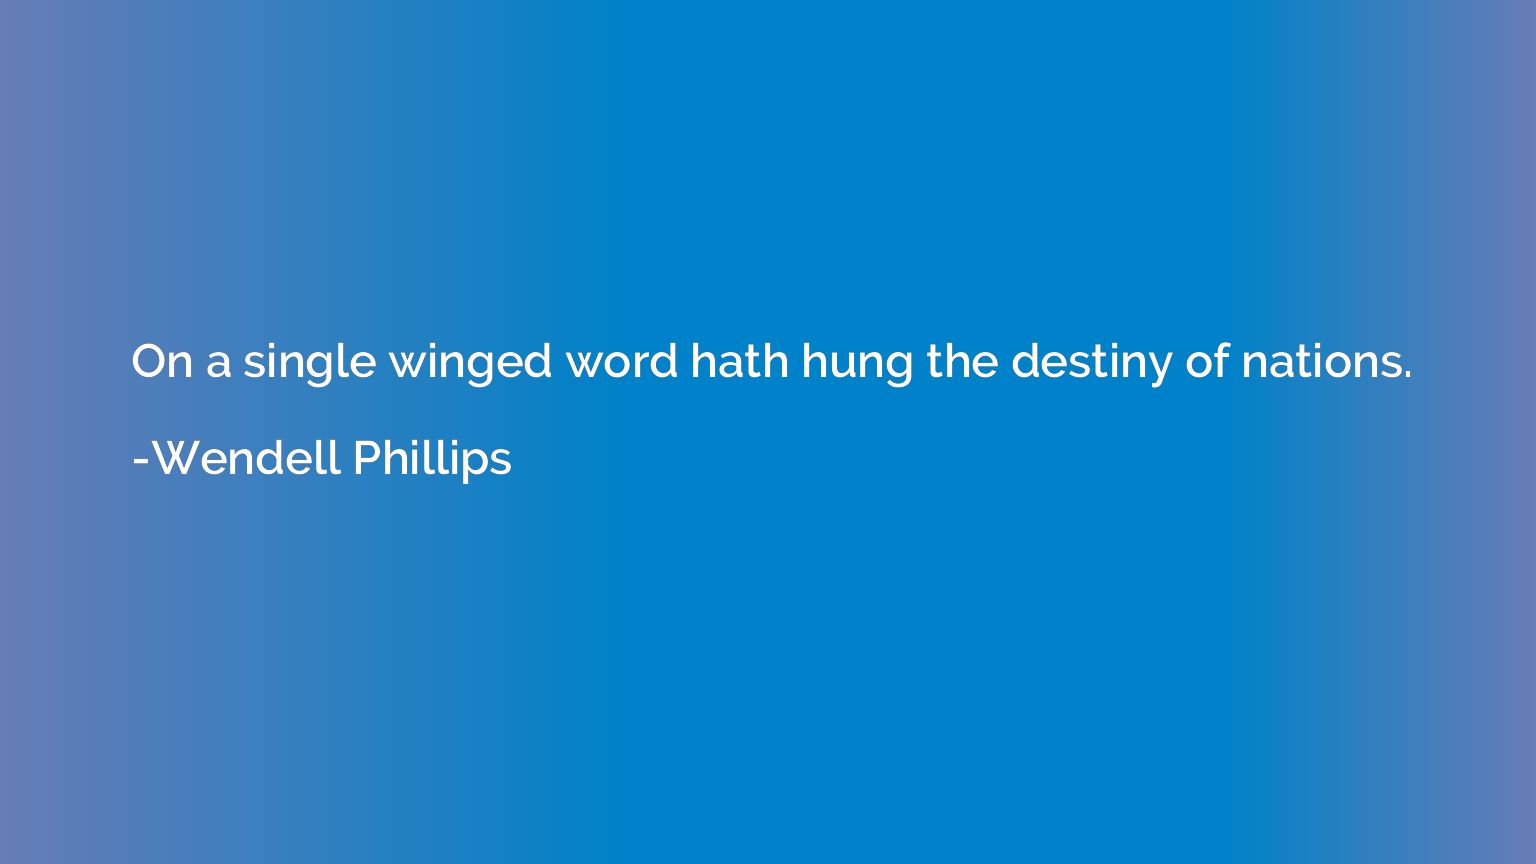 On a single winged word hath hung the destiny of nations.